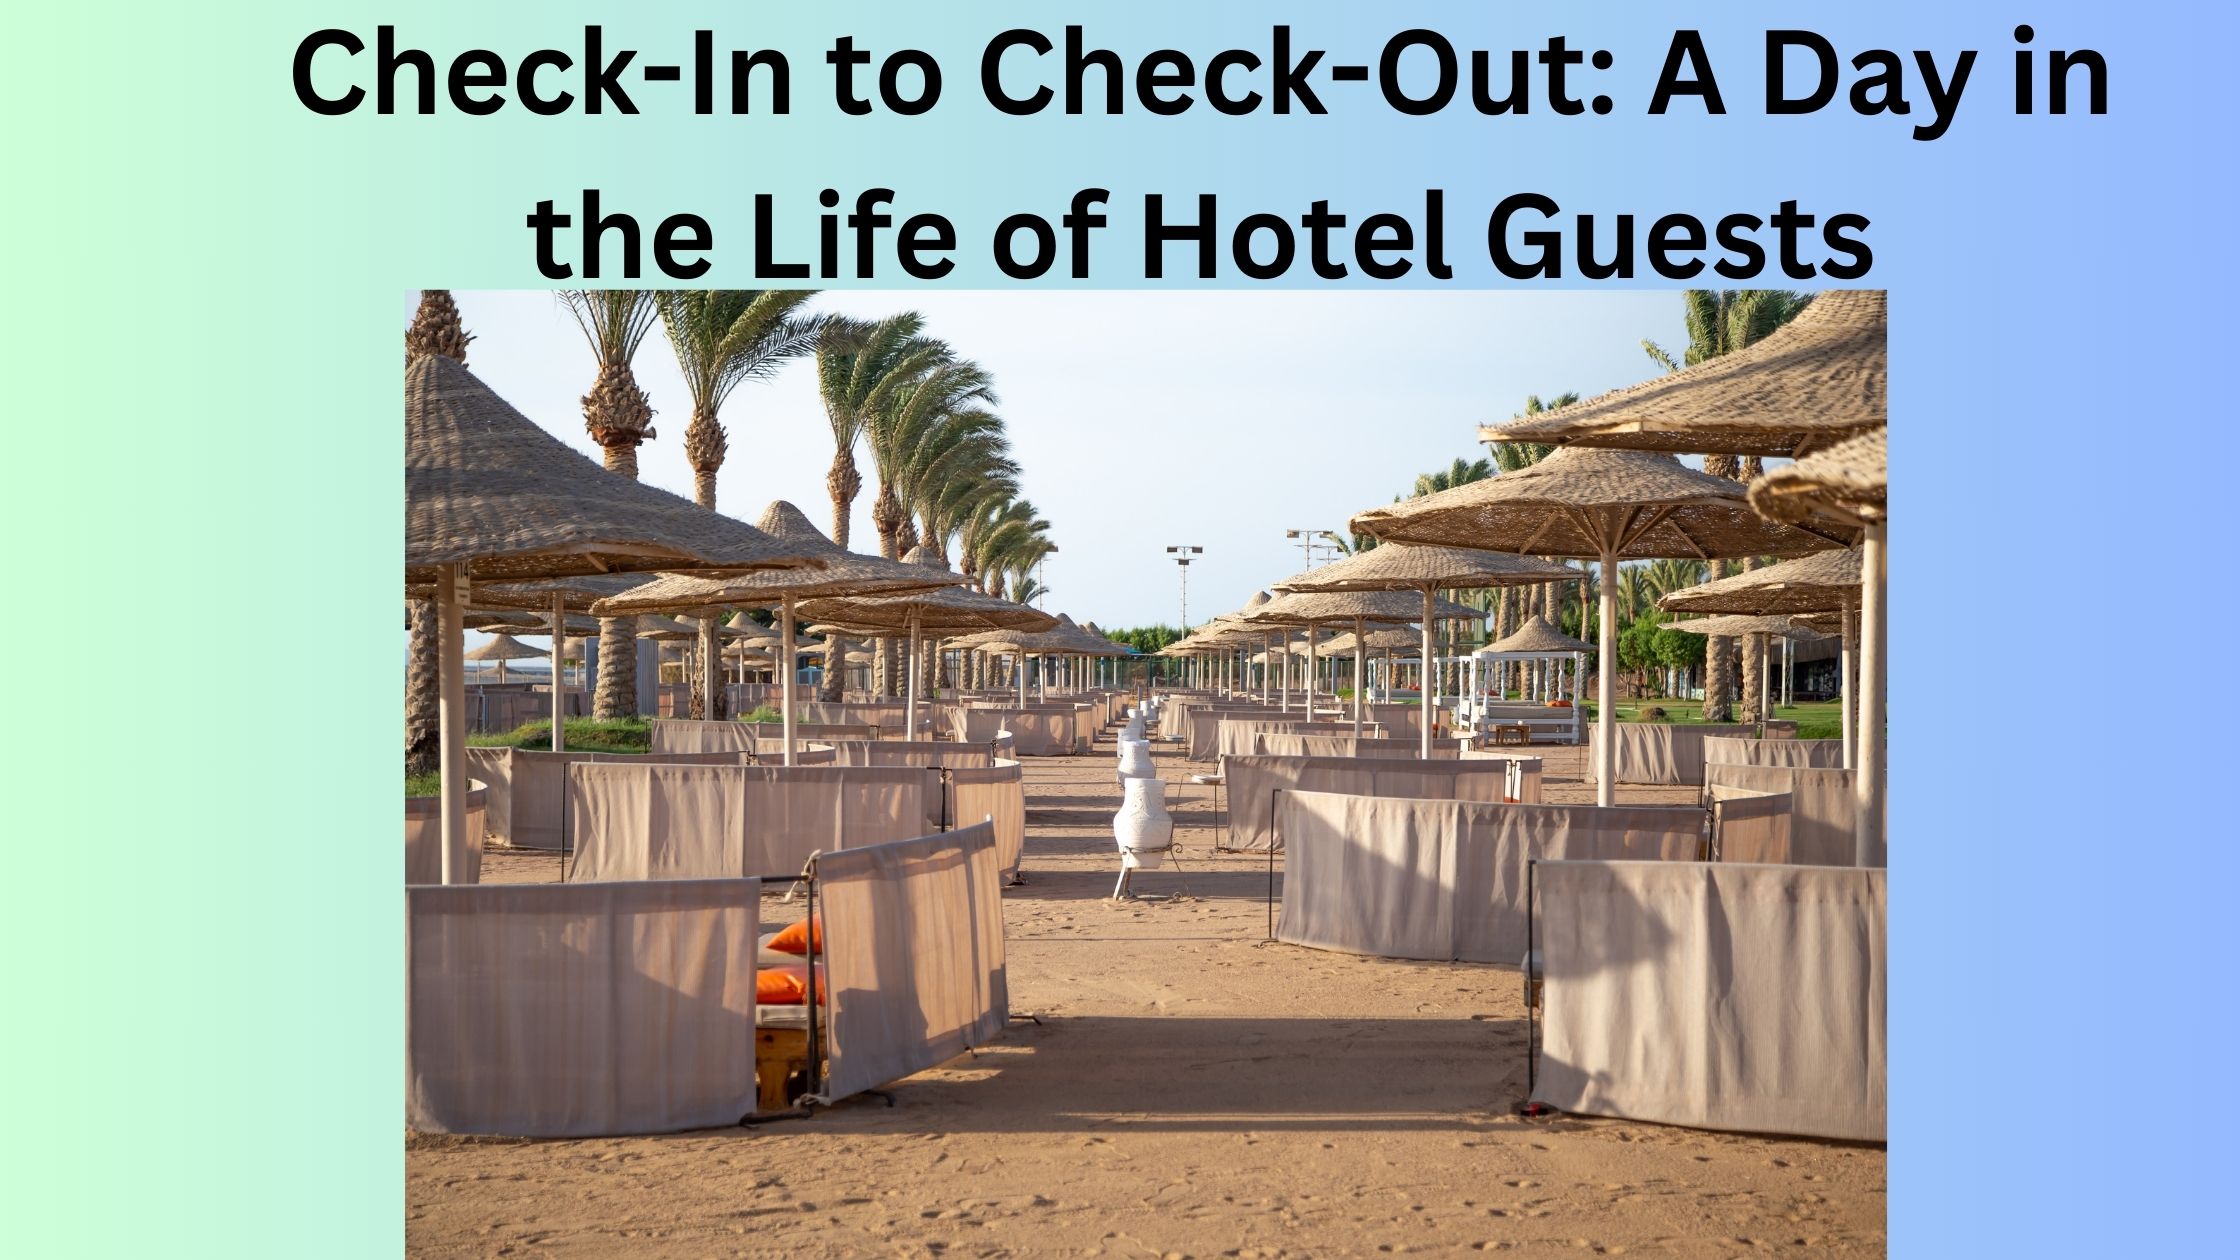 Check-In to Check-Out: A Day in the Life of Hotel Guests